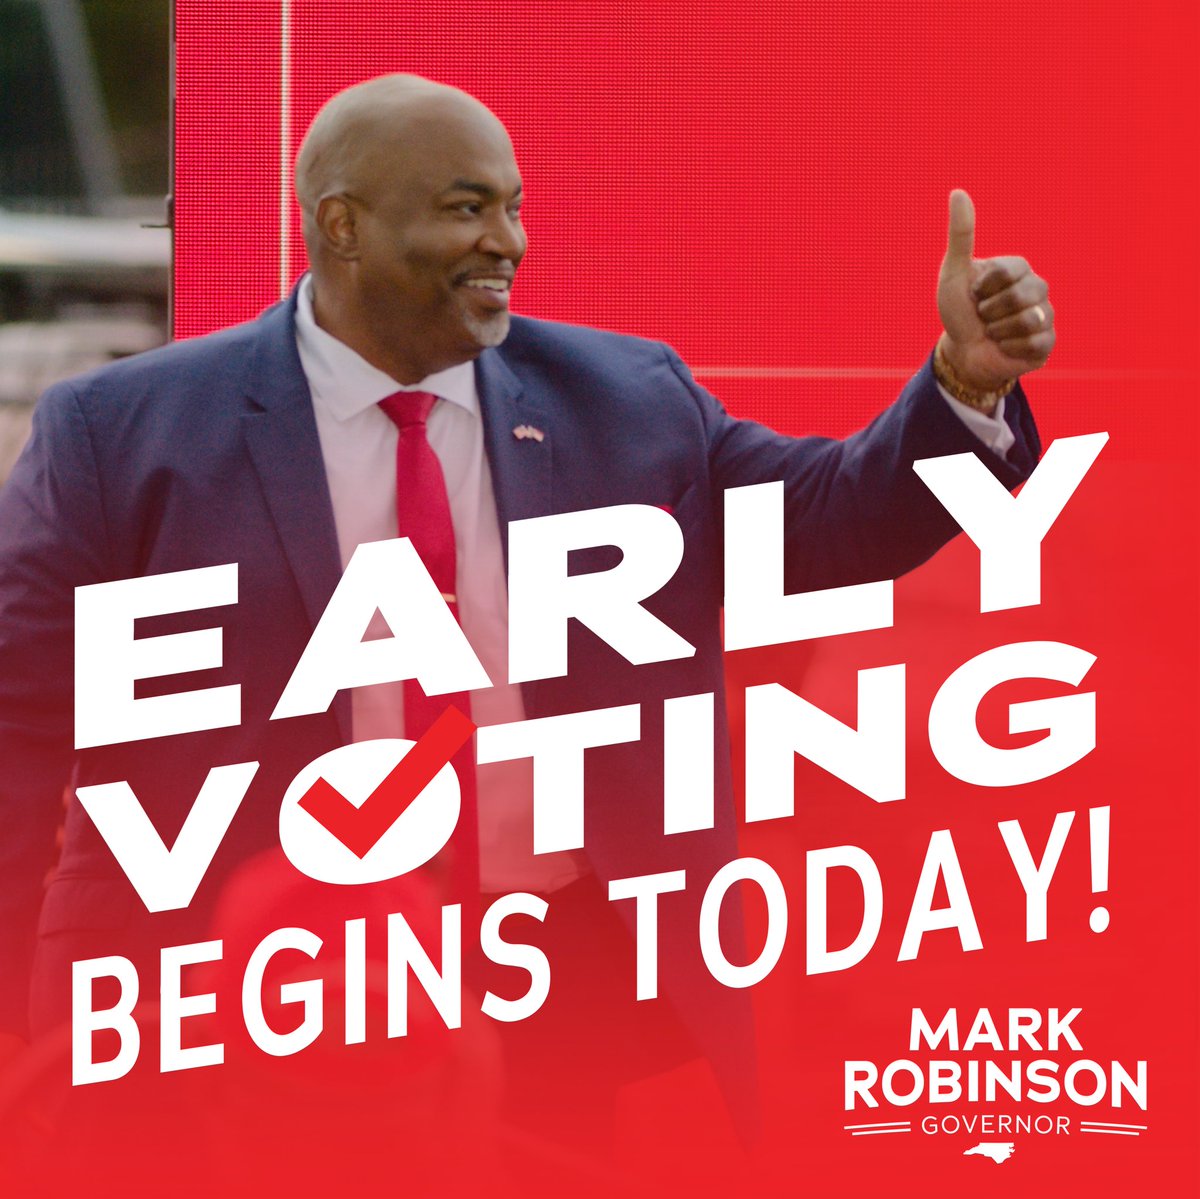 ATTENTION, TEAM ROBINSON: In-person early voting for the 2024 North Carolina primary begins TODAY across our state! Are you ready to Reclaim and Restore North Carolina? Find your early voting polling location HERE: vt.ncsbe.gov/EVSite/